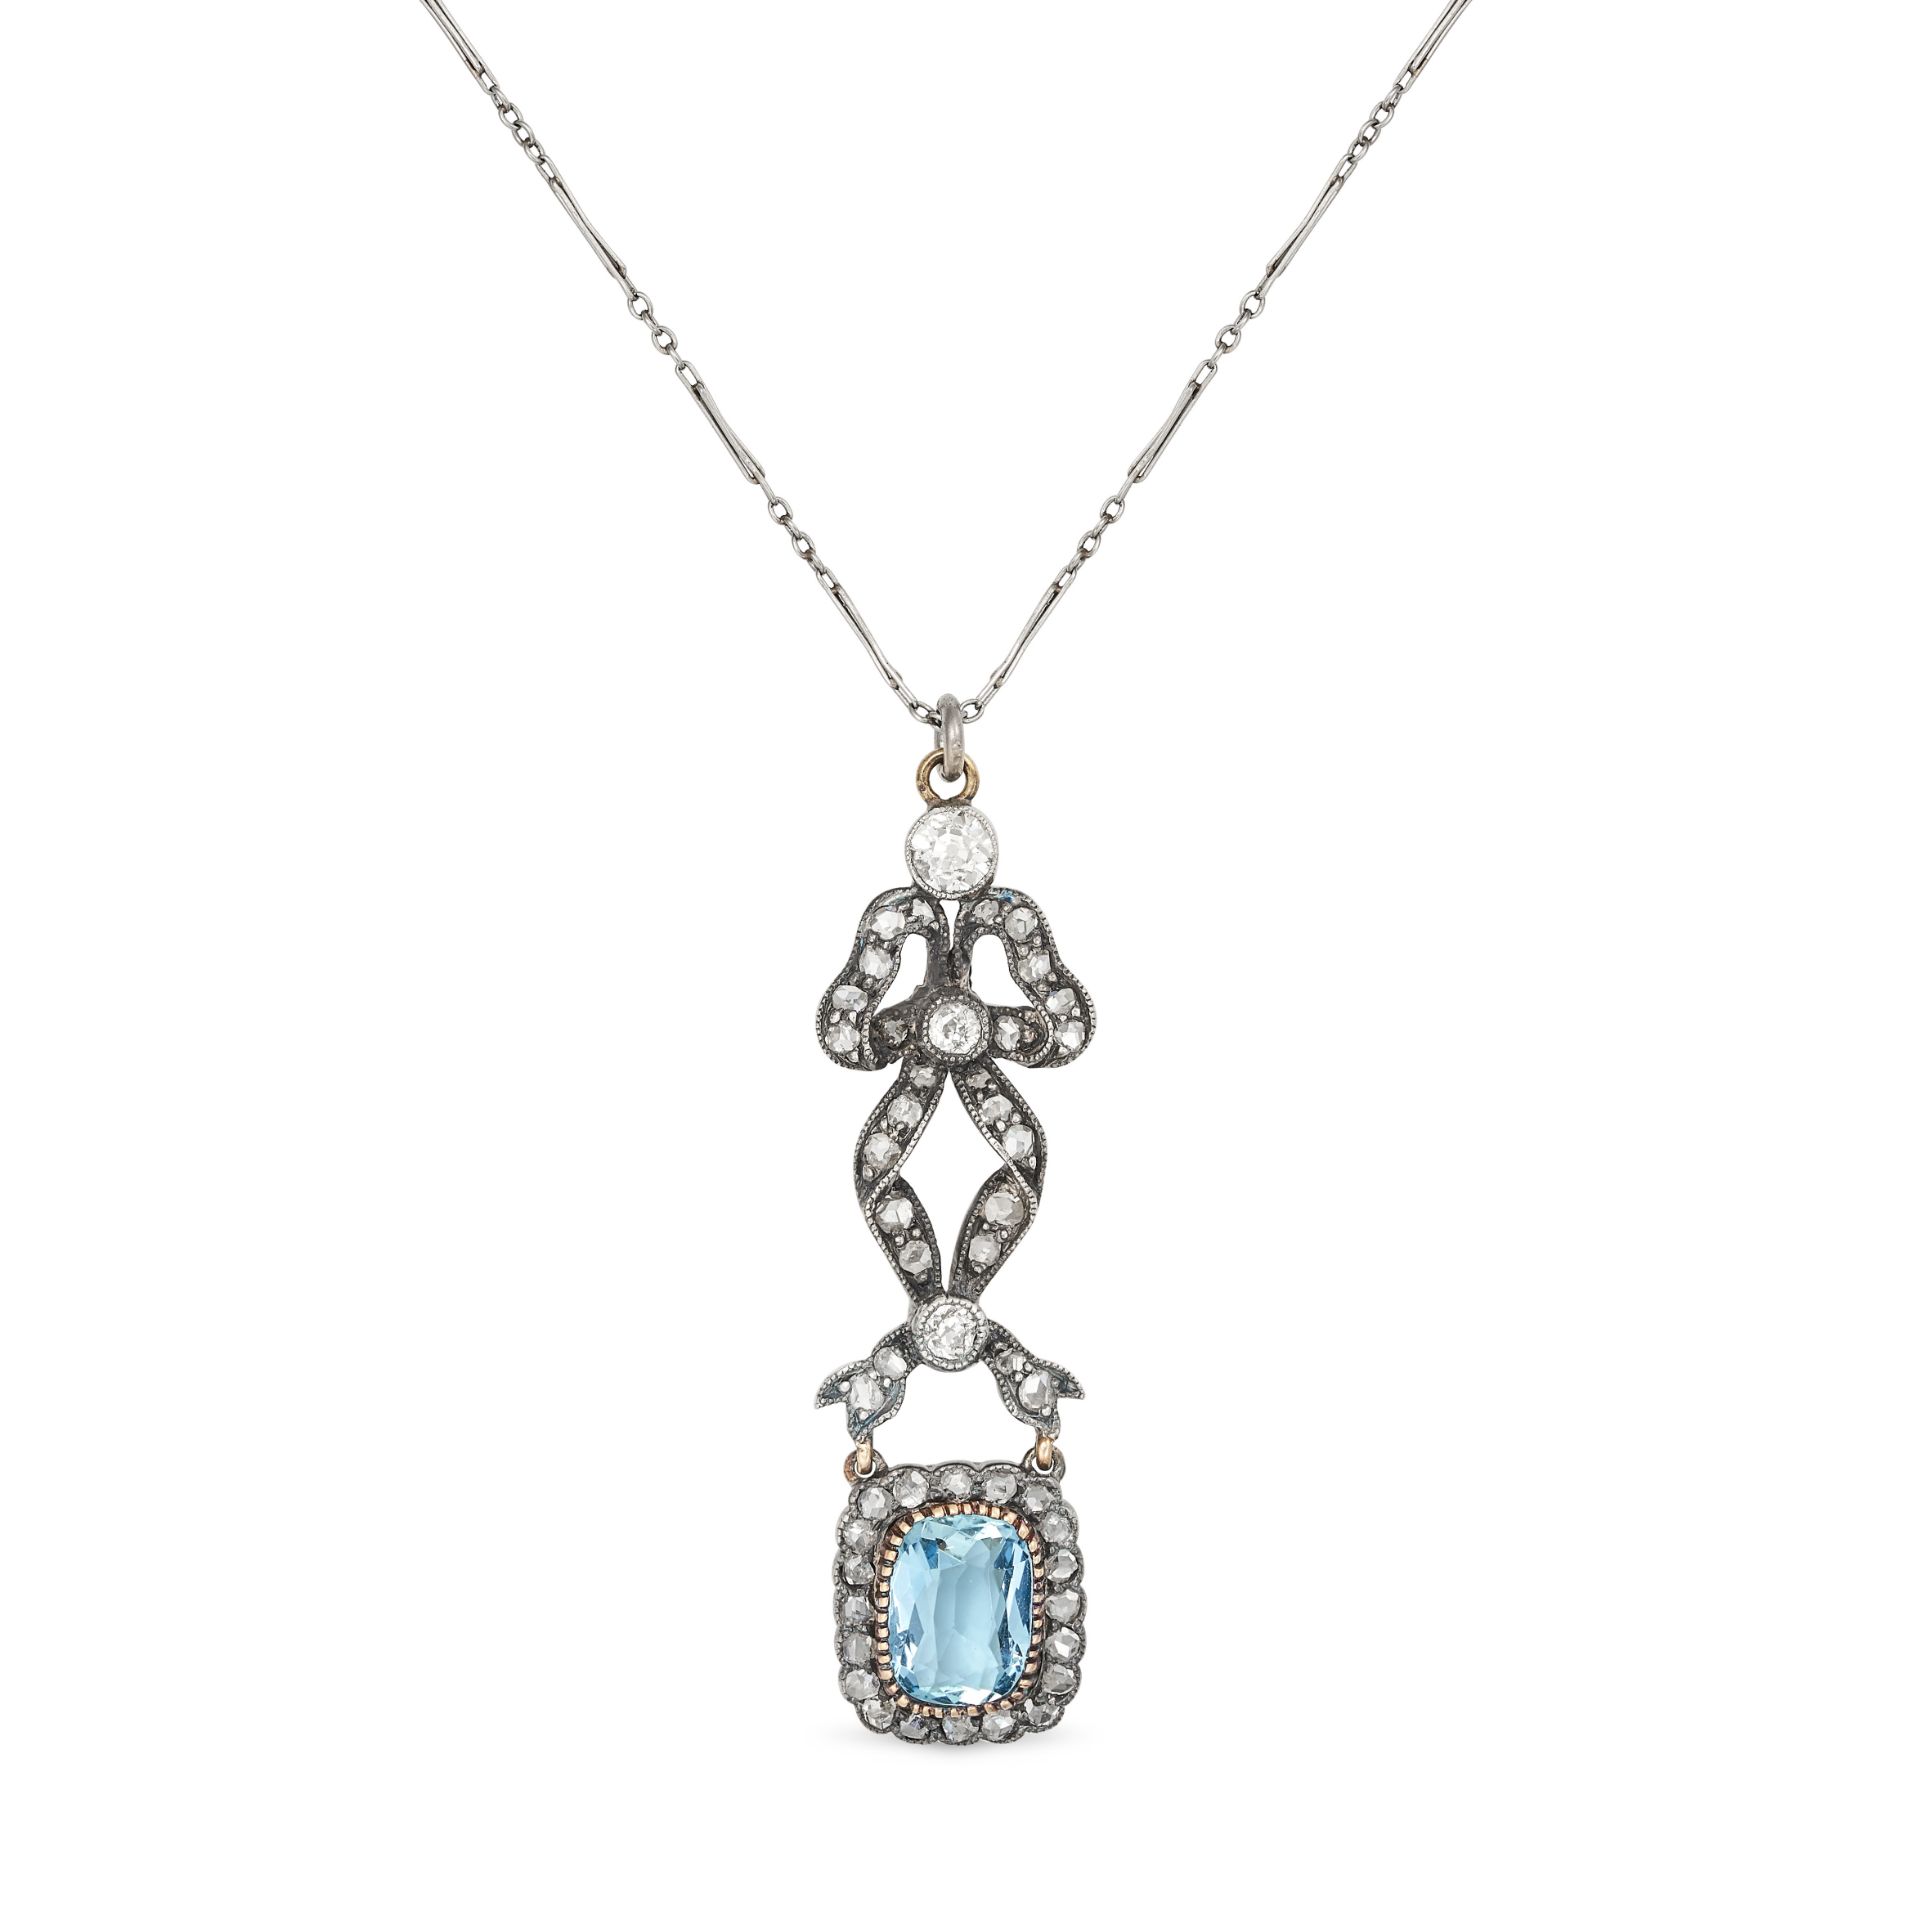 AN ANTIQUE AQUAMARINE AND DIAMOND PENDANT NECKLACE in yellow gold and silver, the pendant designe...